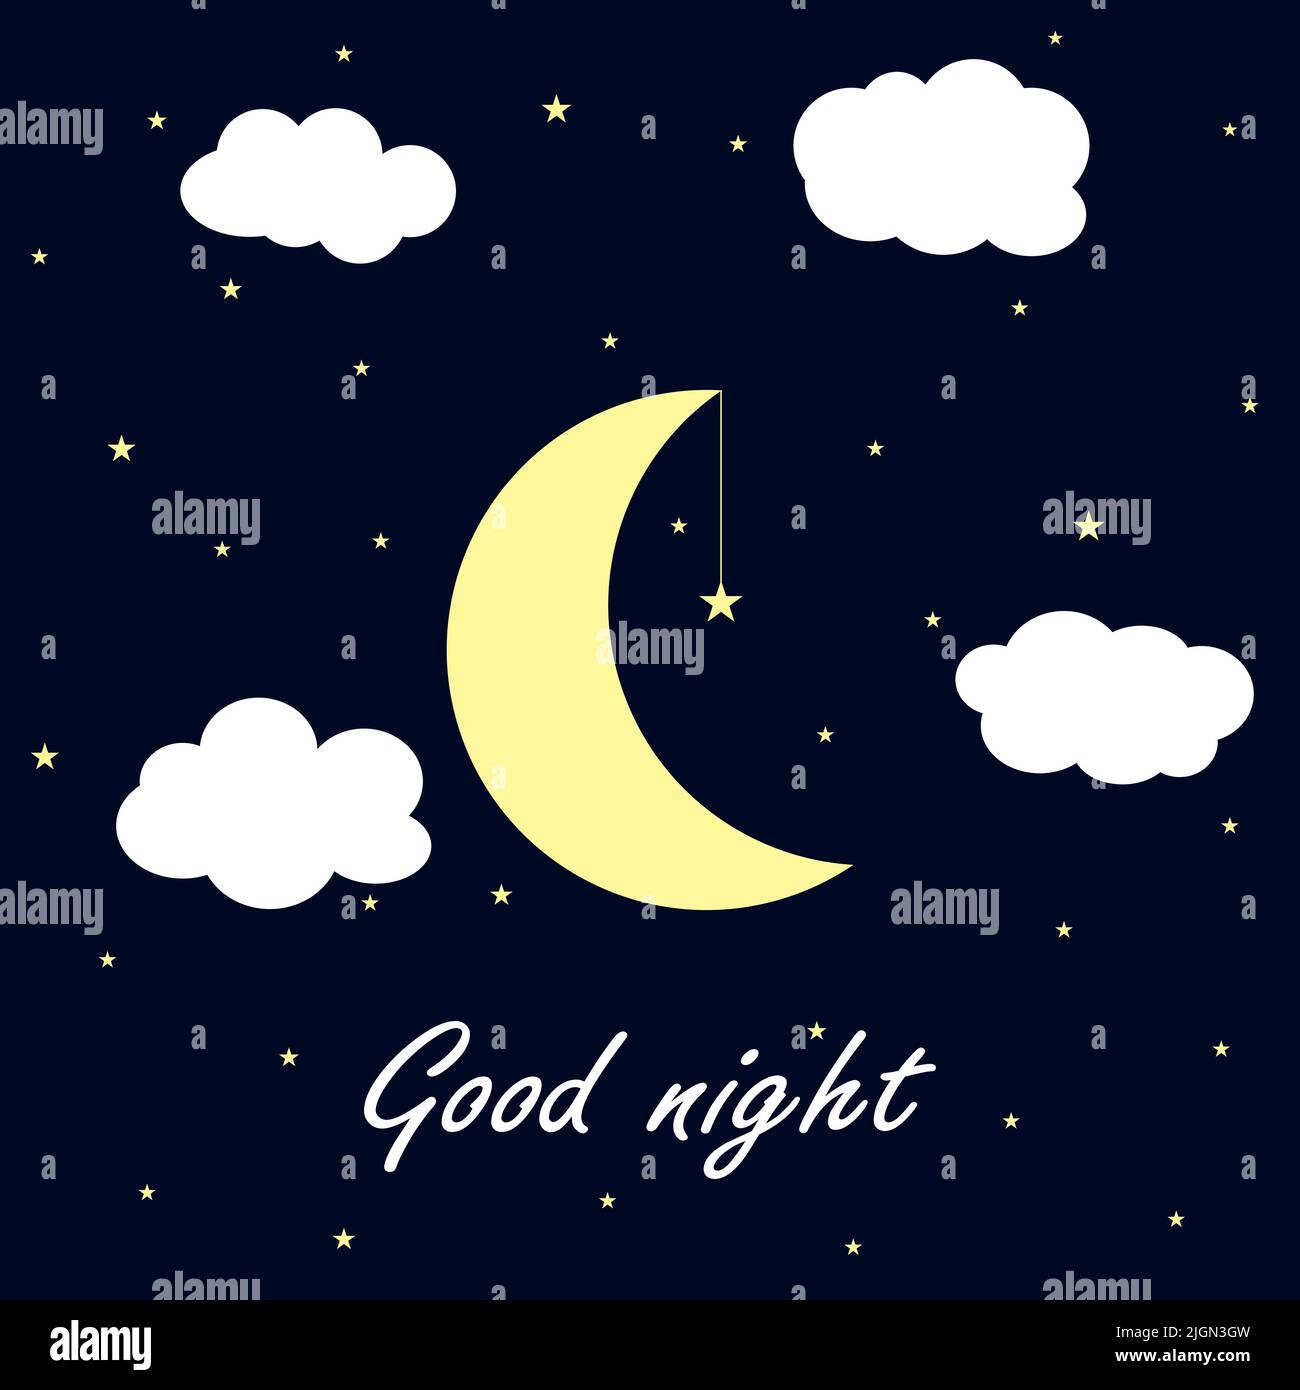 Good night vector illustration. Moon and stars in the night sky with ...